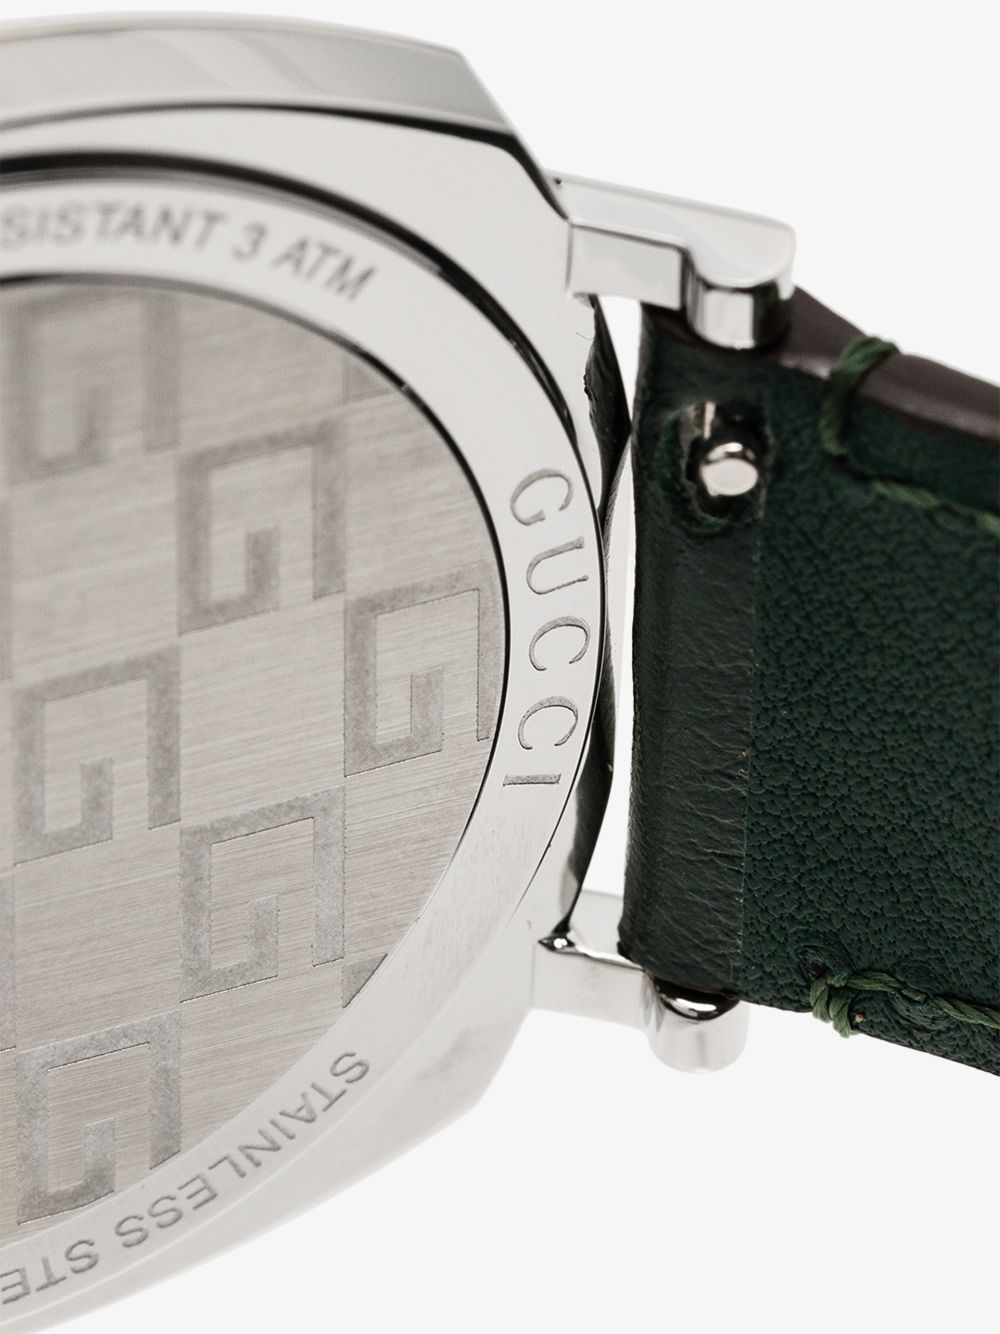 Shop Gucci Stainless Steel Grip Watch In Green